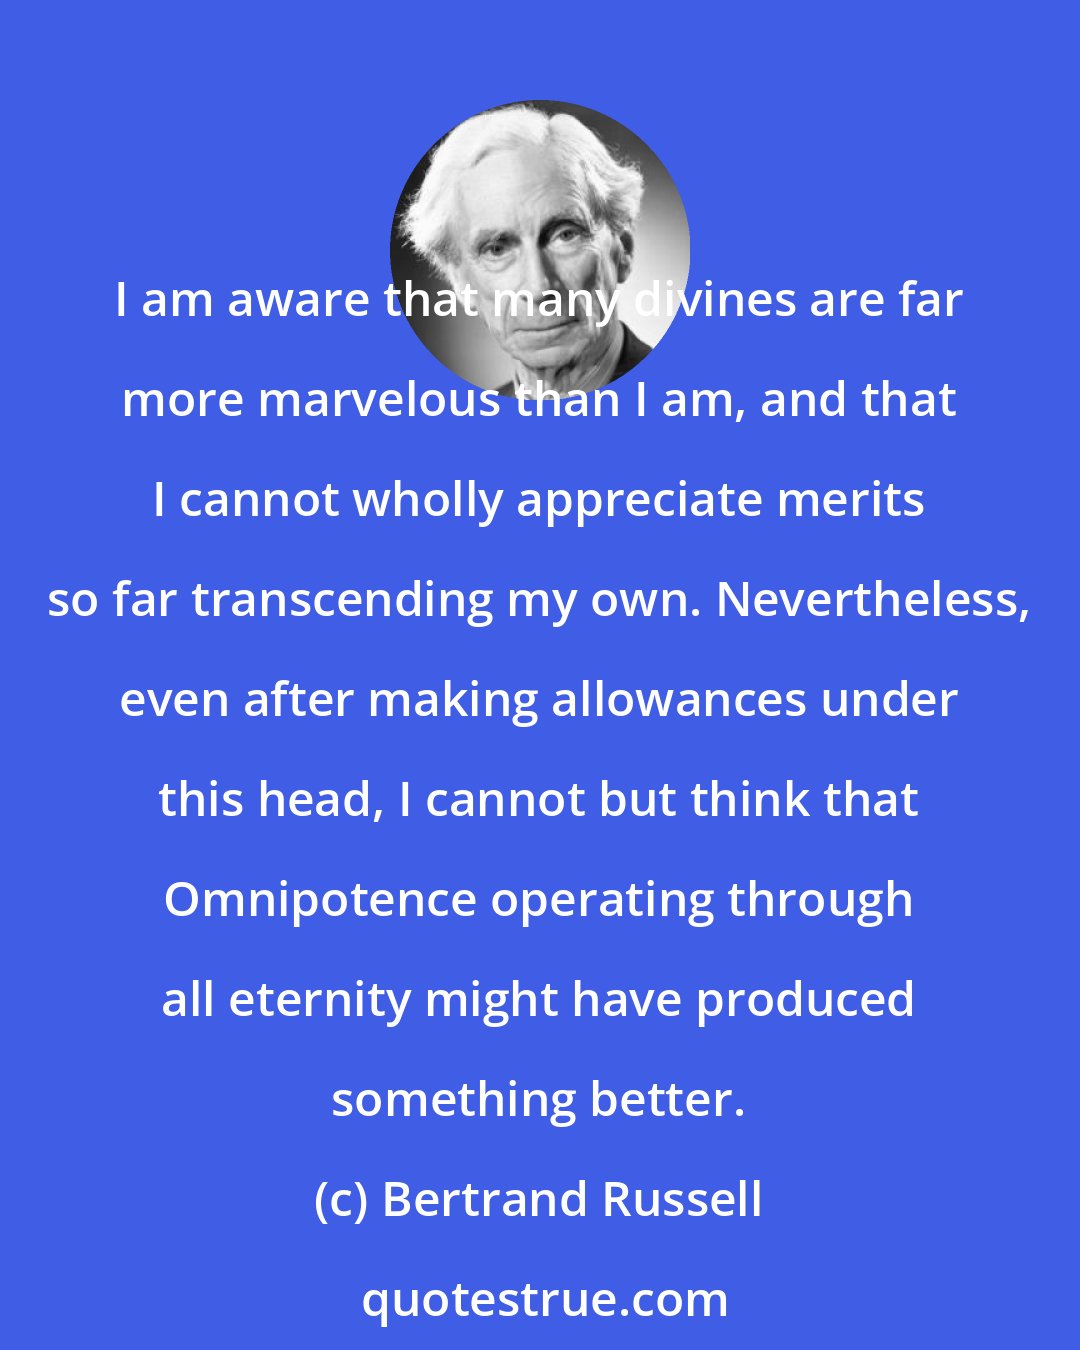 Bertrand Russell: I am aware that many divines are far more marvelous than I am, and that I cannot wholly appreciate merits so far transcending my own. Nevertheless, even after making allowances under this head, I cannot but think that Omnipotence operating through all eternity might have produced something better.